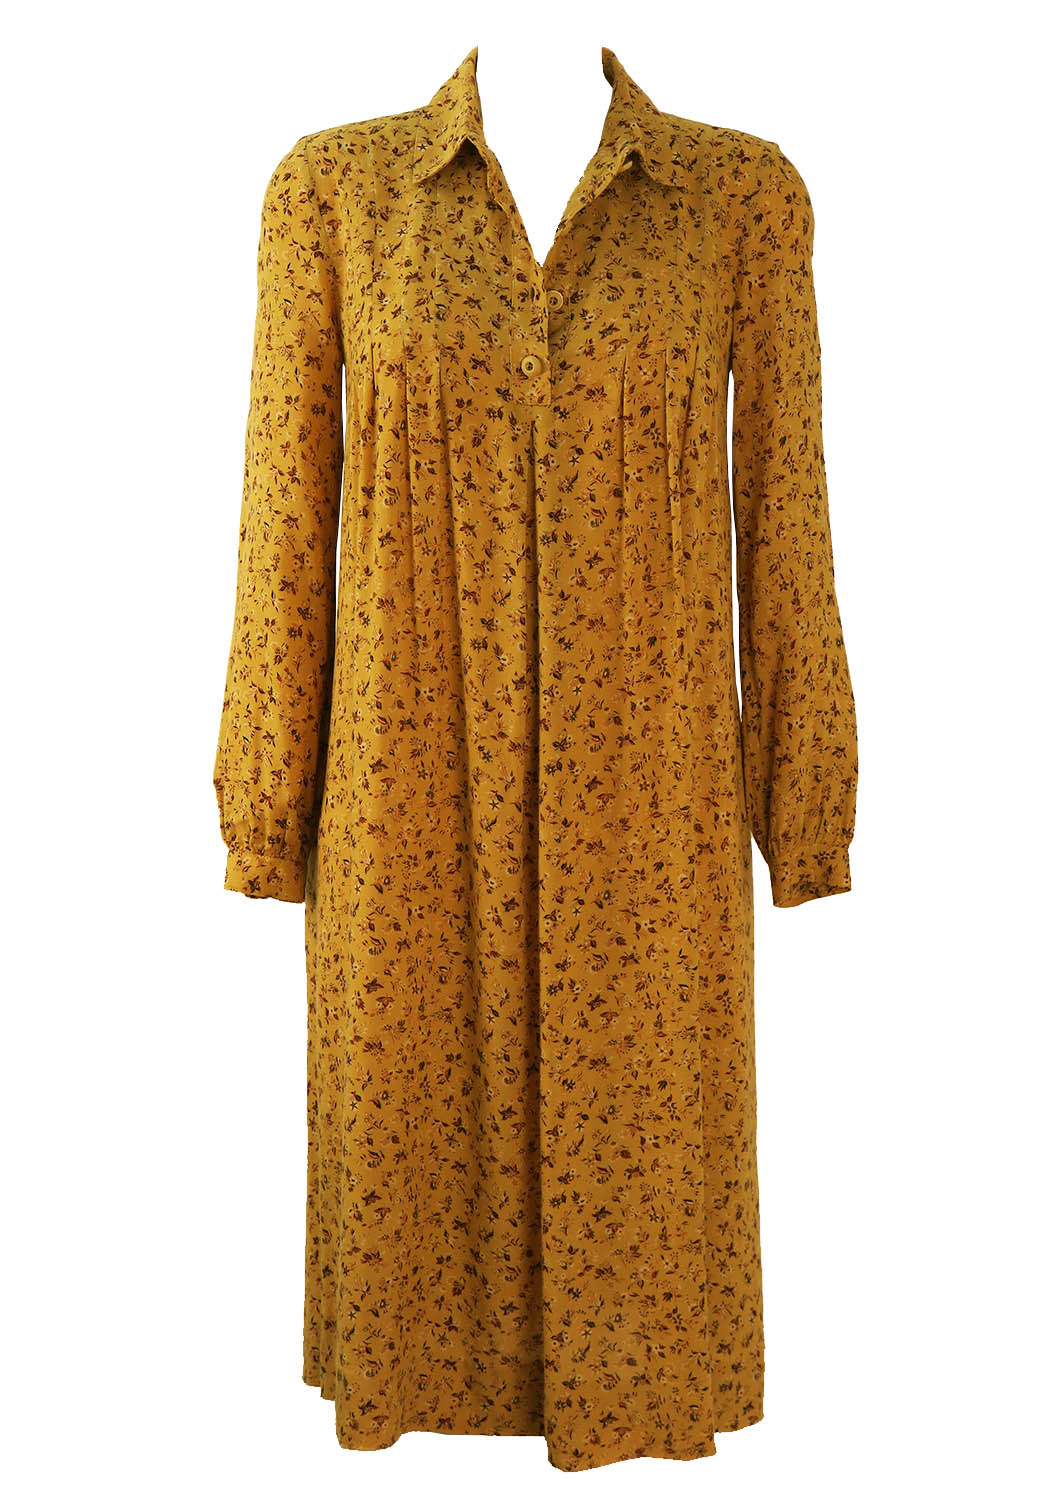 Ditsy Print Floral Smock Dress in Warm Yellow & Brown - M | Reign Vintage